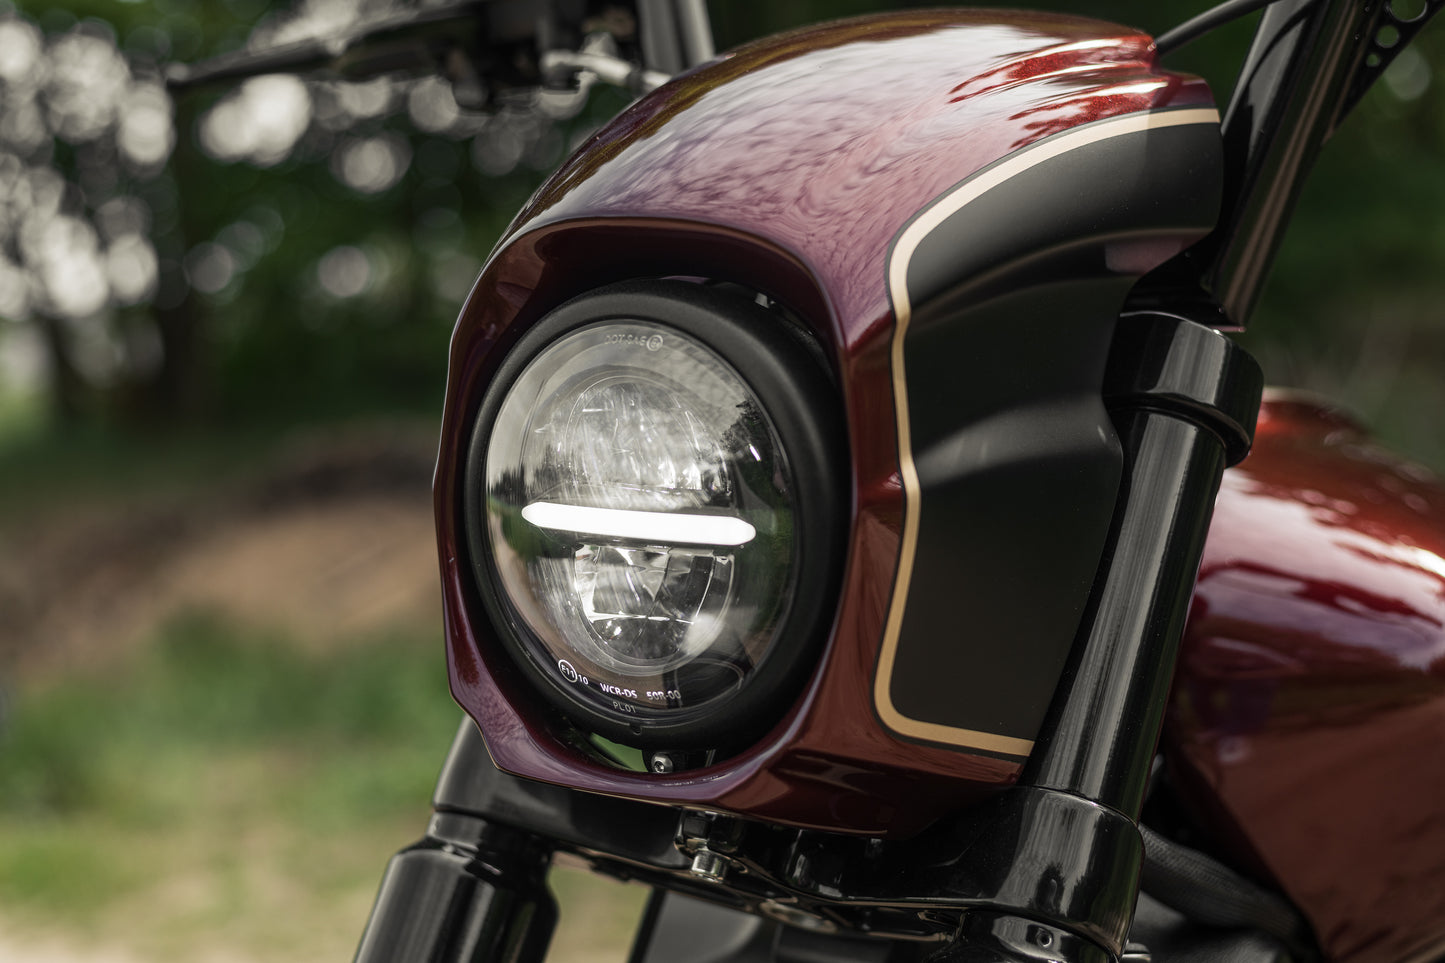 Zoomed Harley Davidson motorcycle with Killer Custom "Tomahawk" series headlight fairing from the front with a blurry forest background